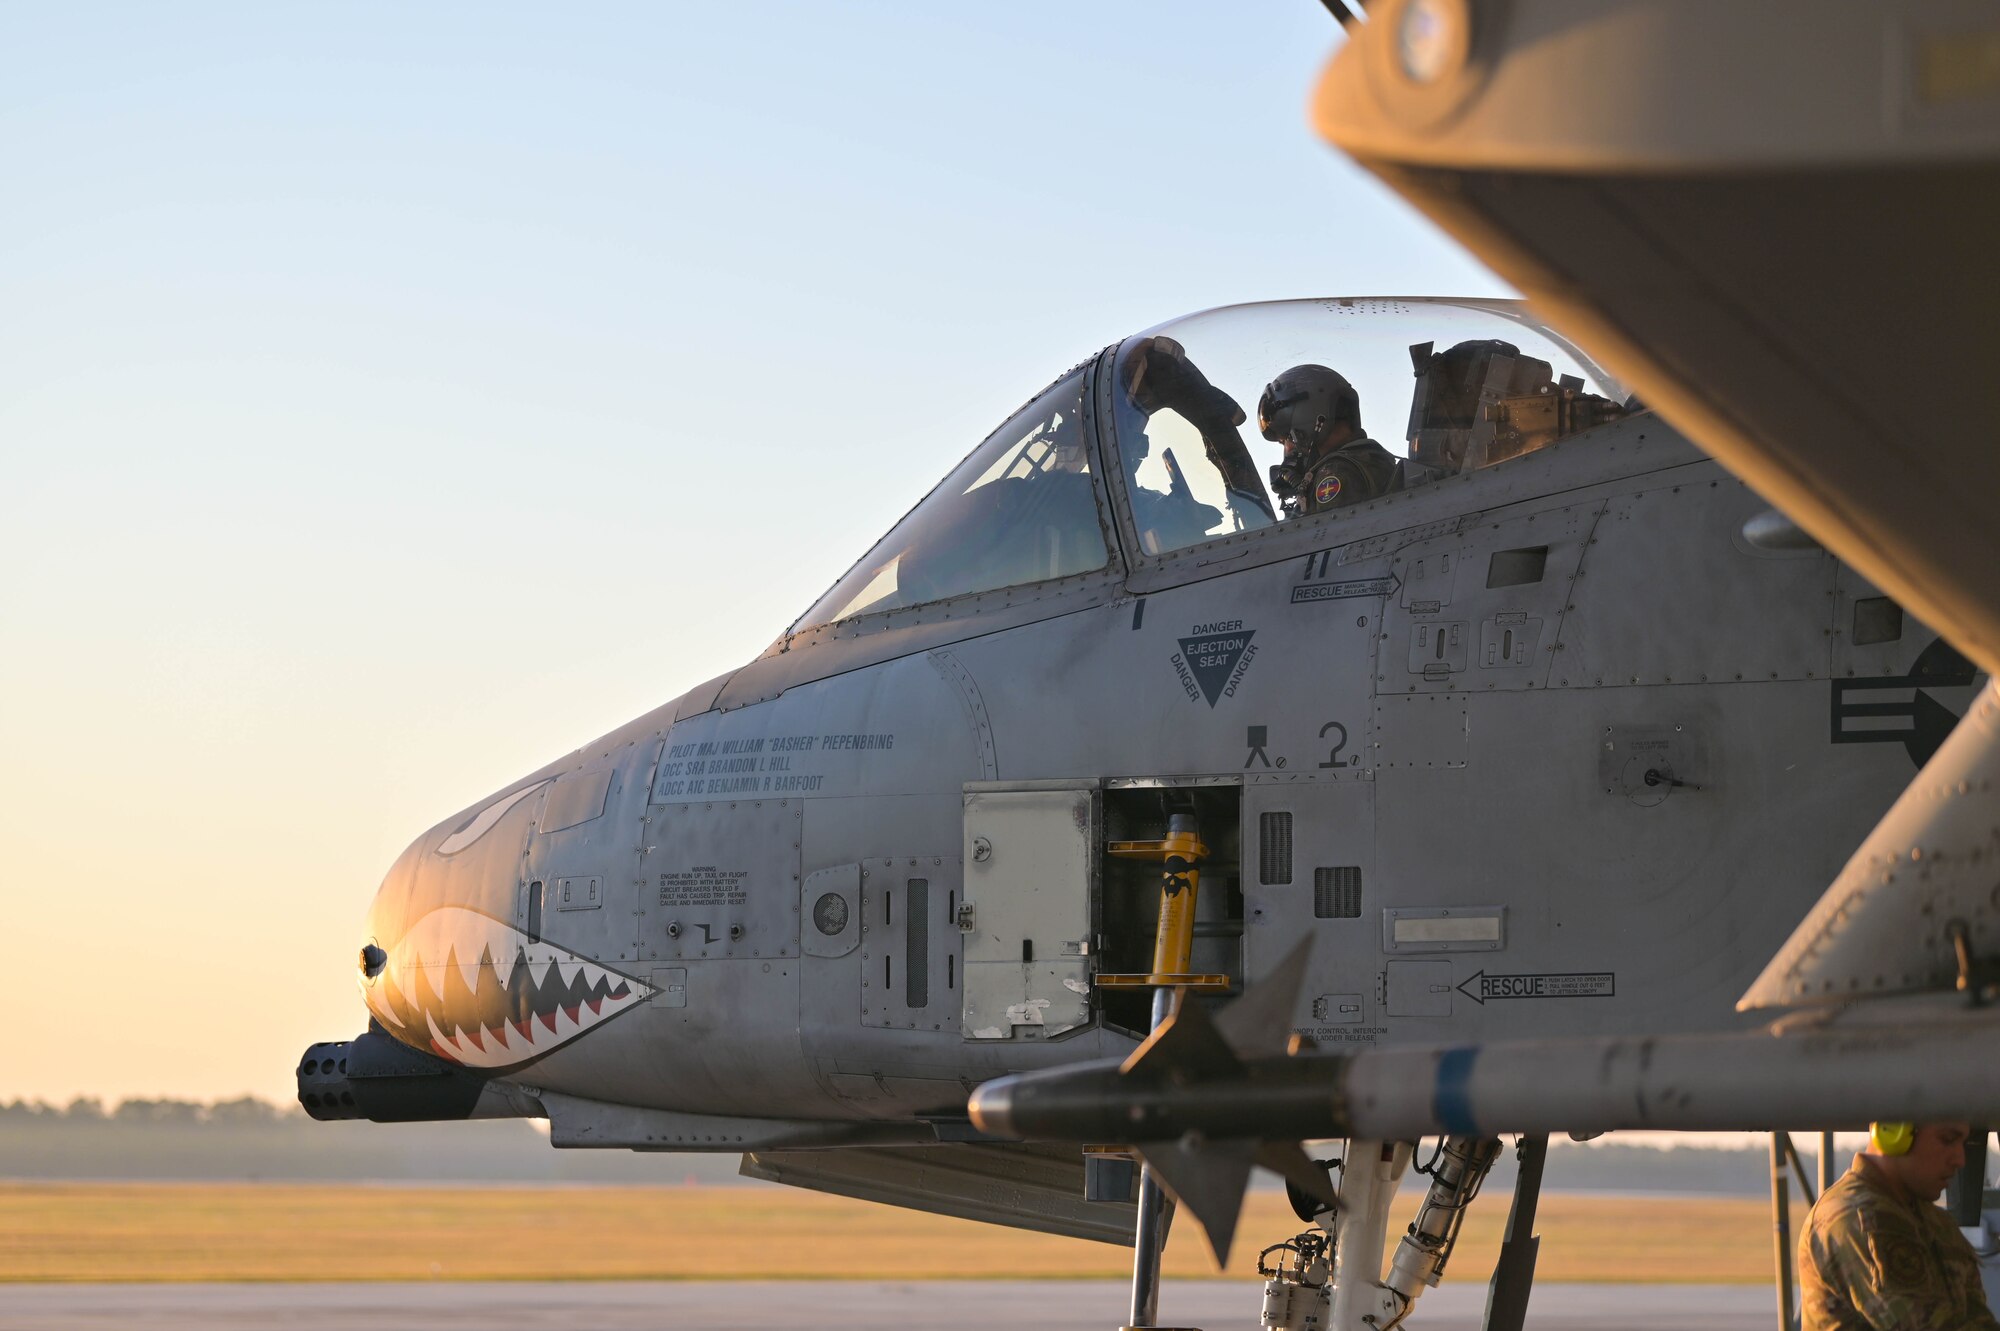 U.S. Air Force Capt. Matthew Dorsey, 74th Fighter Squadron A-10C Thunderbolt II pilot, taxis an A-10C Thunderbolt II down the flightline at Moody Air Force Base, Georgia, Oct. 16, 2022.The 23rd Wing deployed A-10C Thunderbolt II aircraft and support personnel to Andersen Air Force Base, Guam for a routine Dynamic Force Employment Operation. (U.S. Air Force photo by Senior Airman Rebeckah Medeiros)